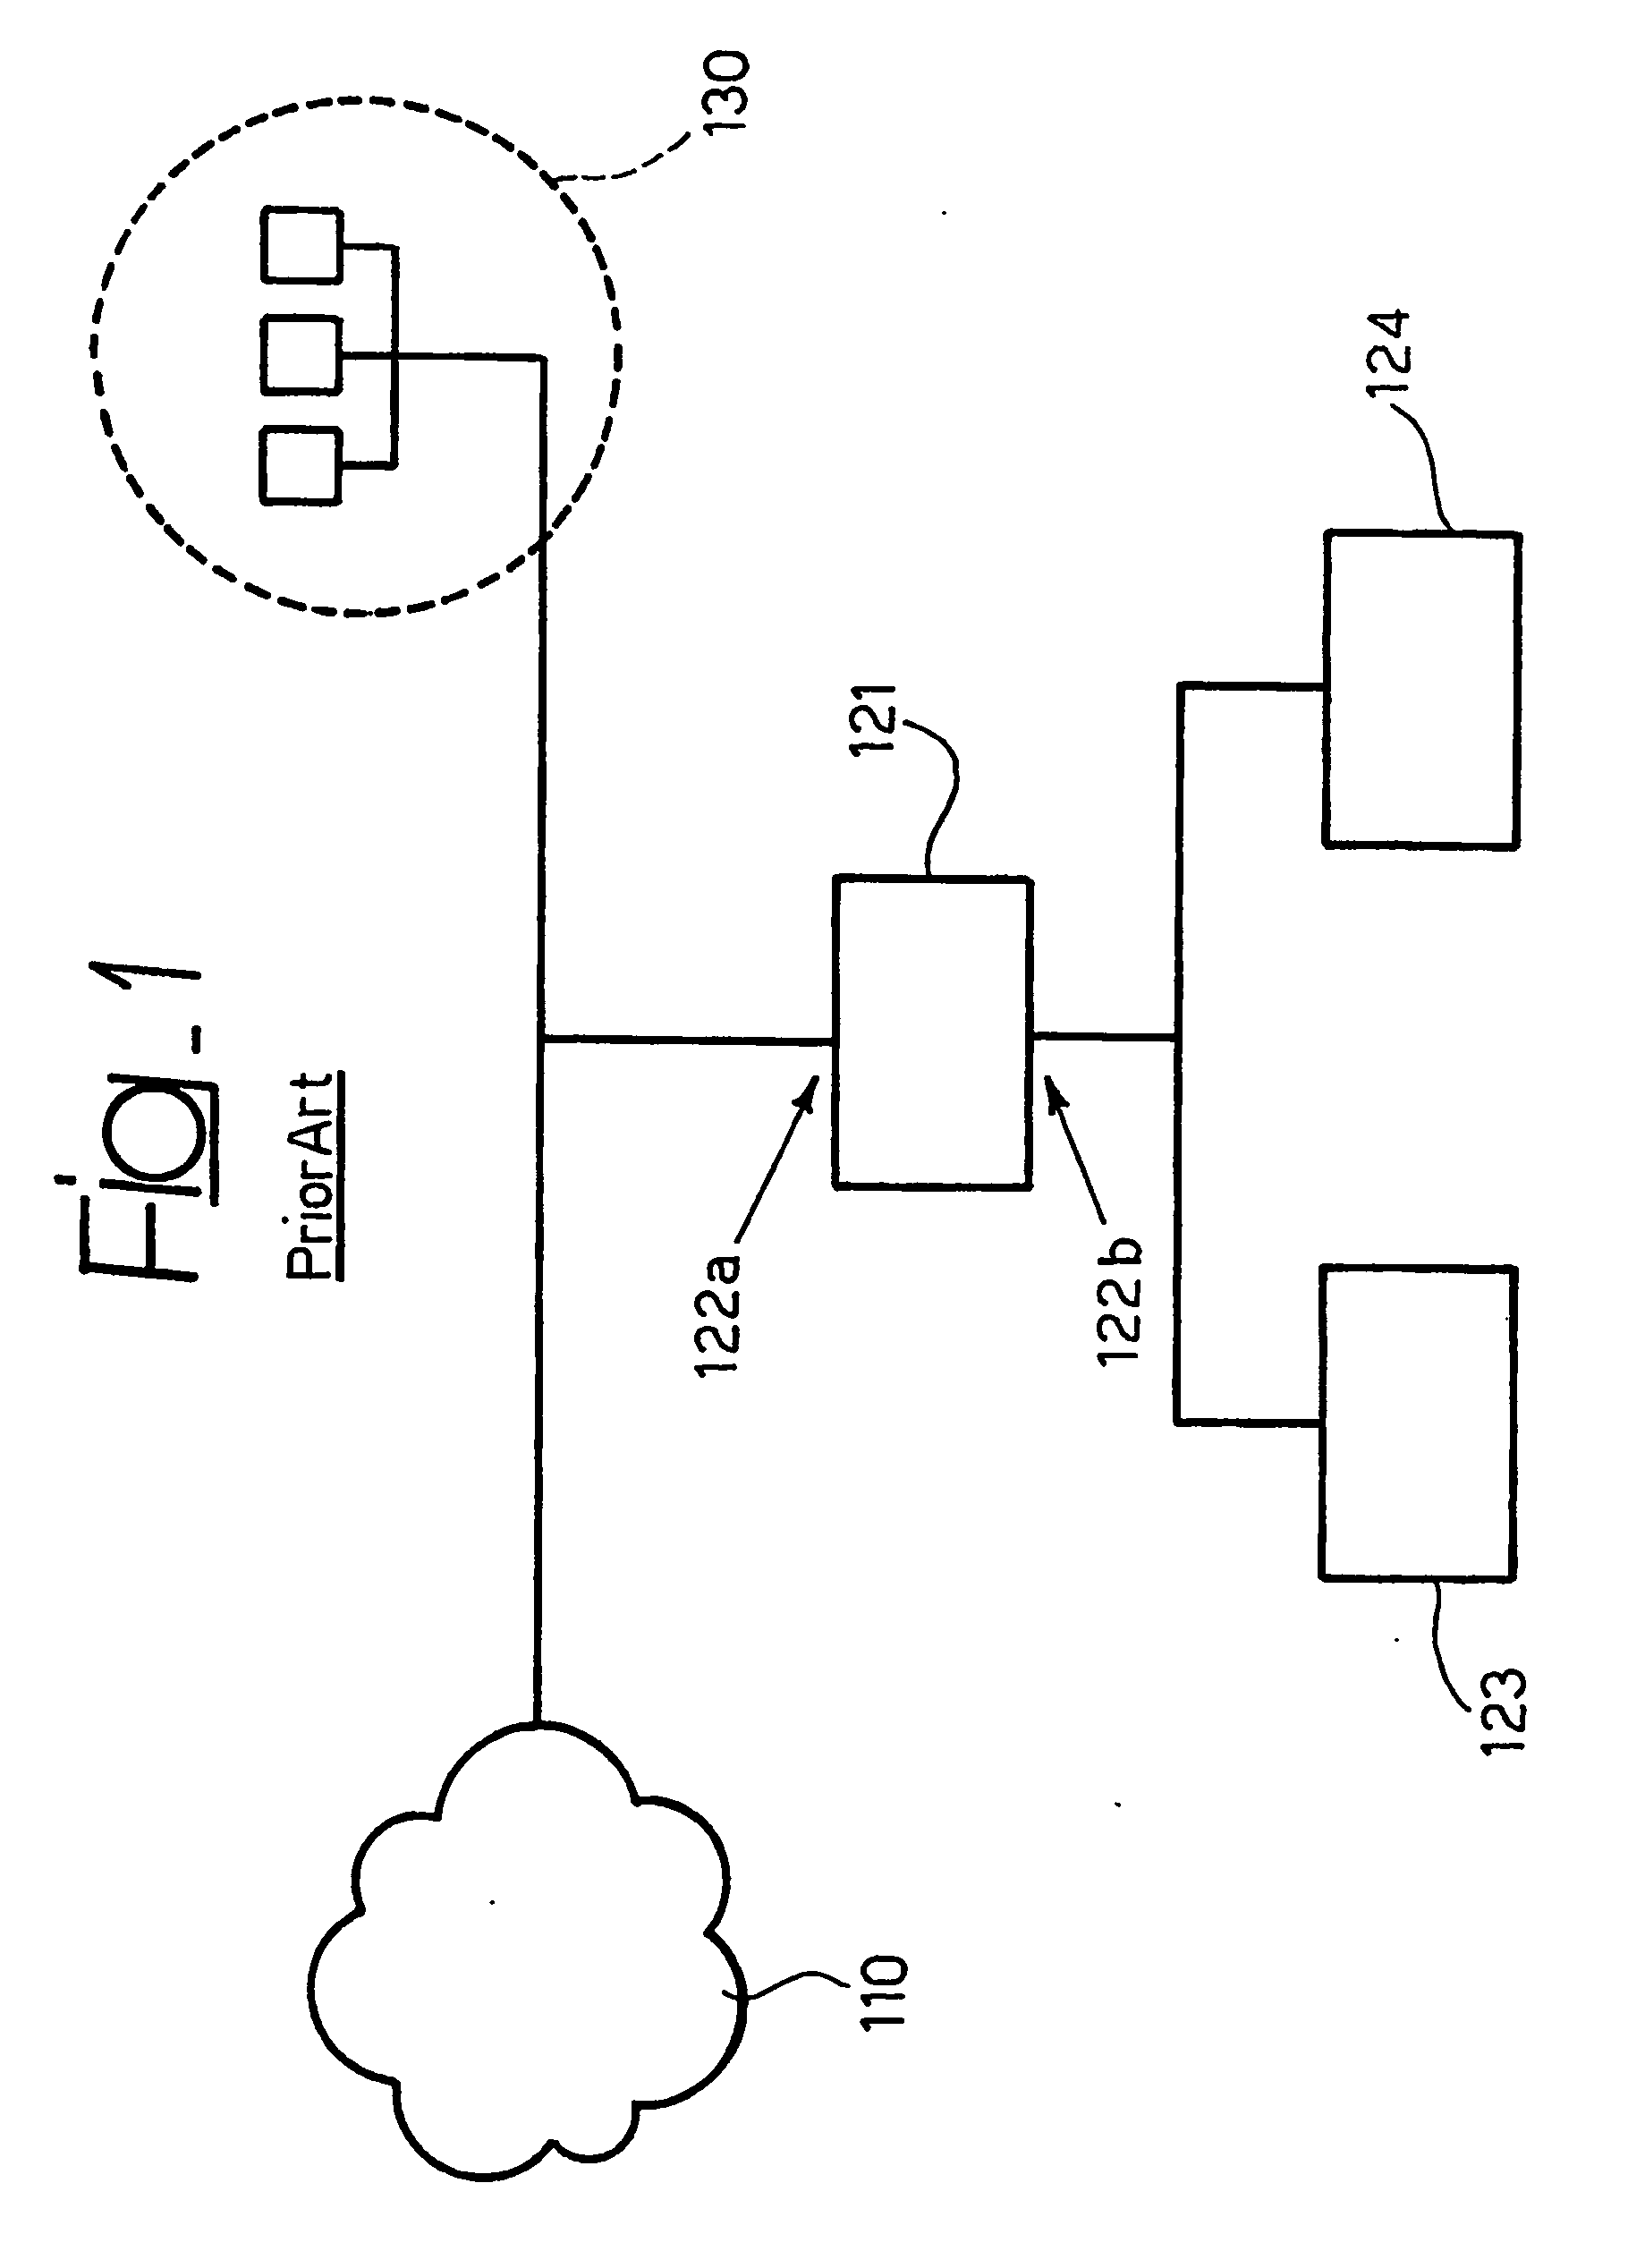 Method and system for intrusion prevention and deflection